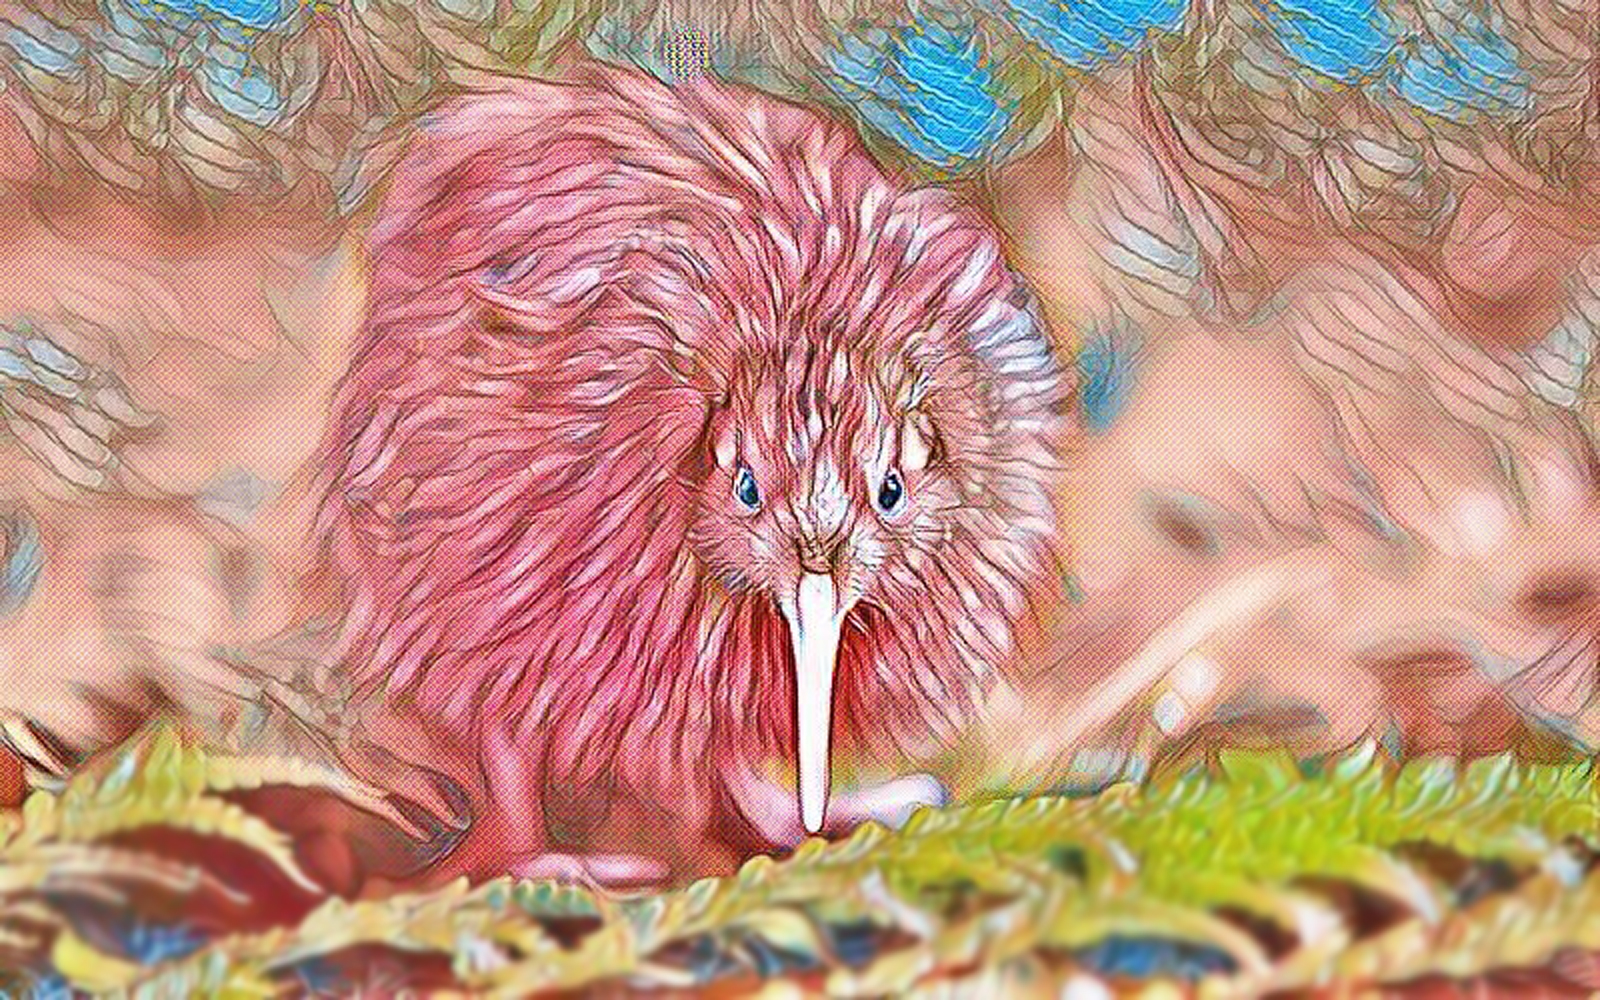 artistic and cartoonized picture of the kiwi bird